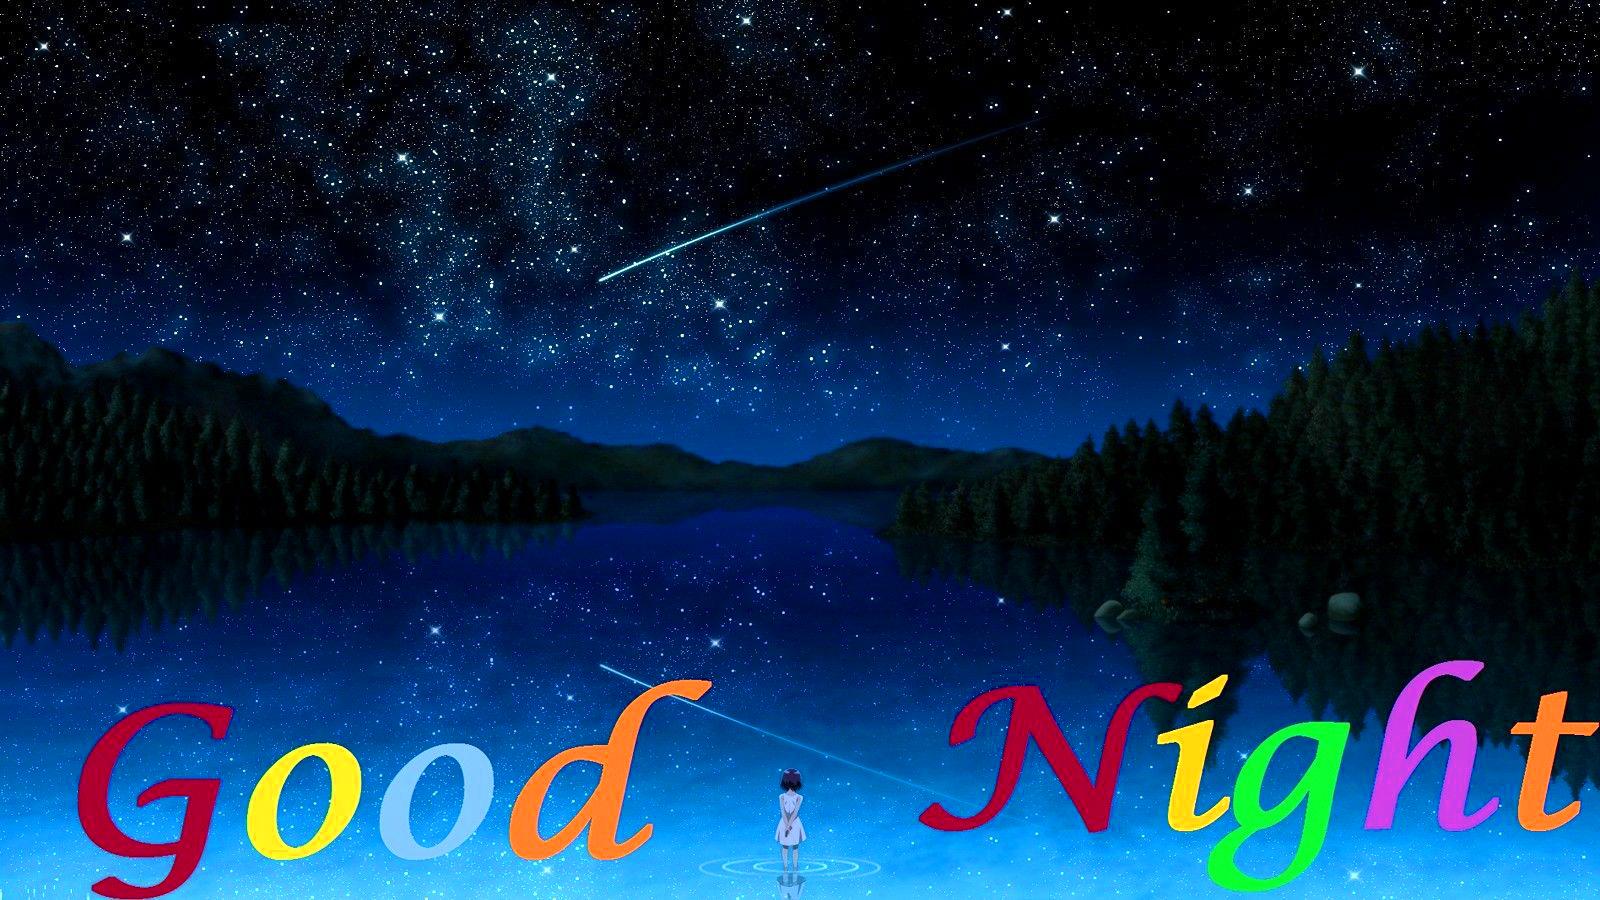 Good Night Image HD Wallpaper Pics Photo Picture Download